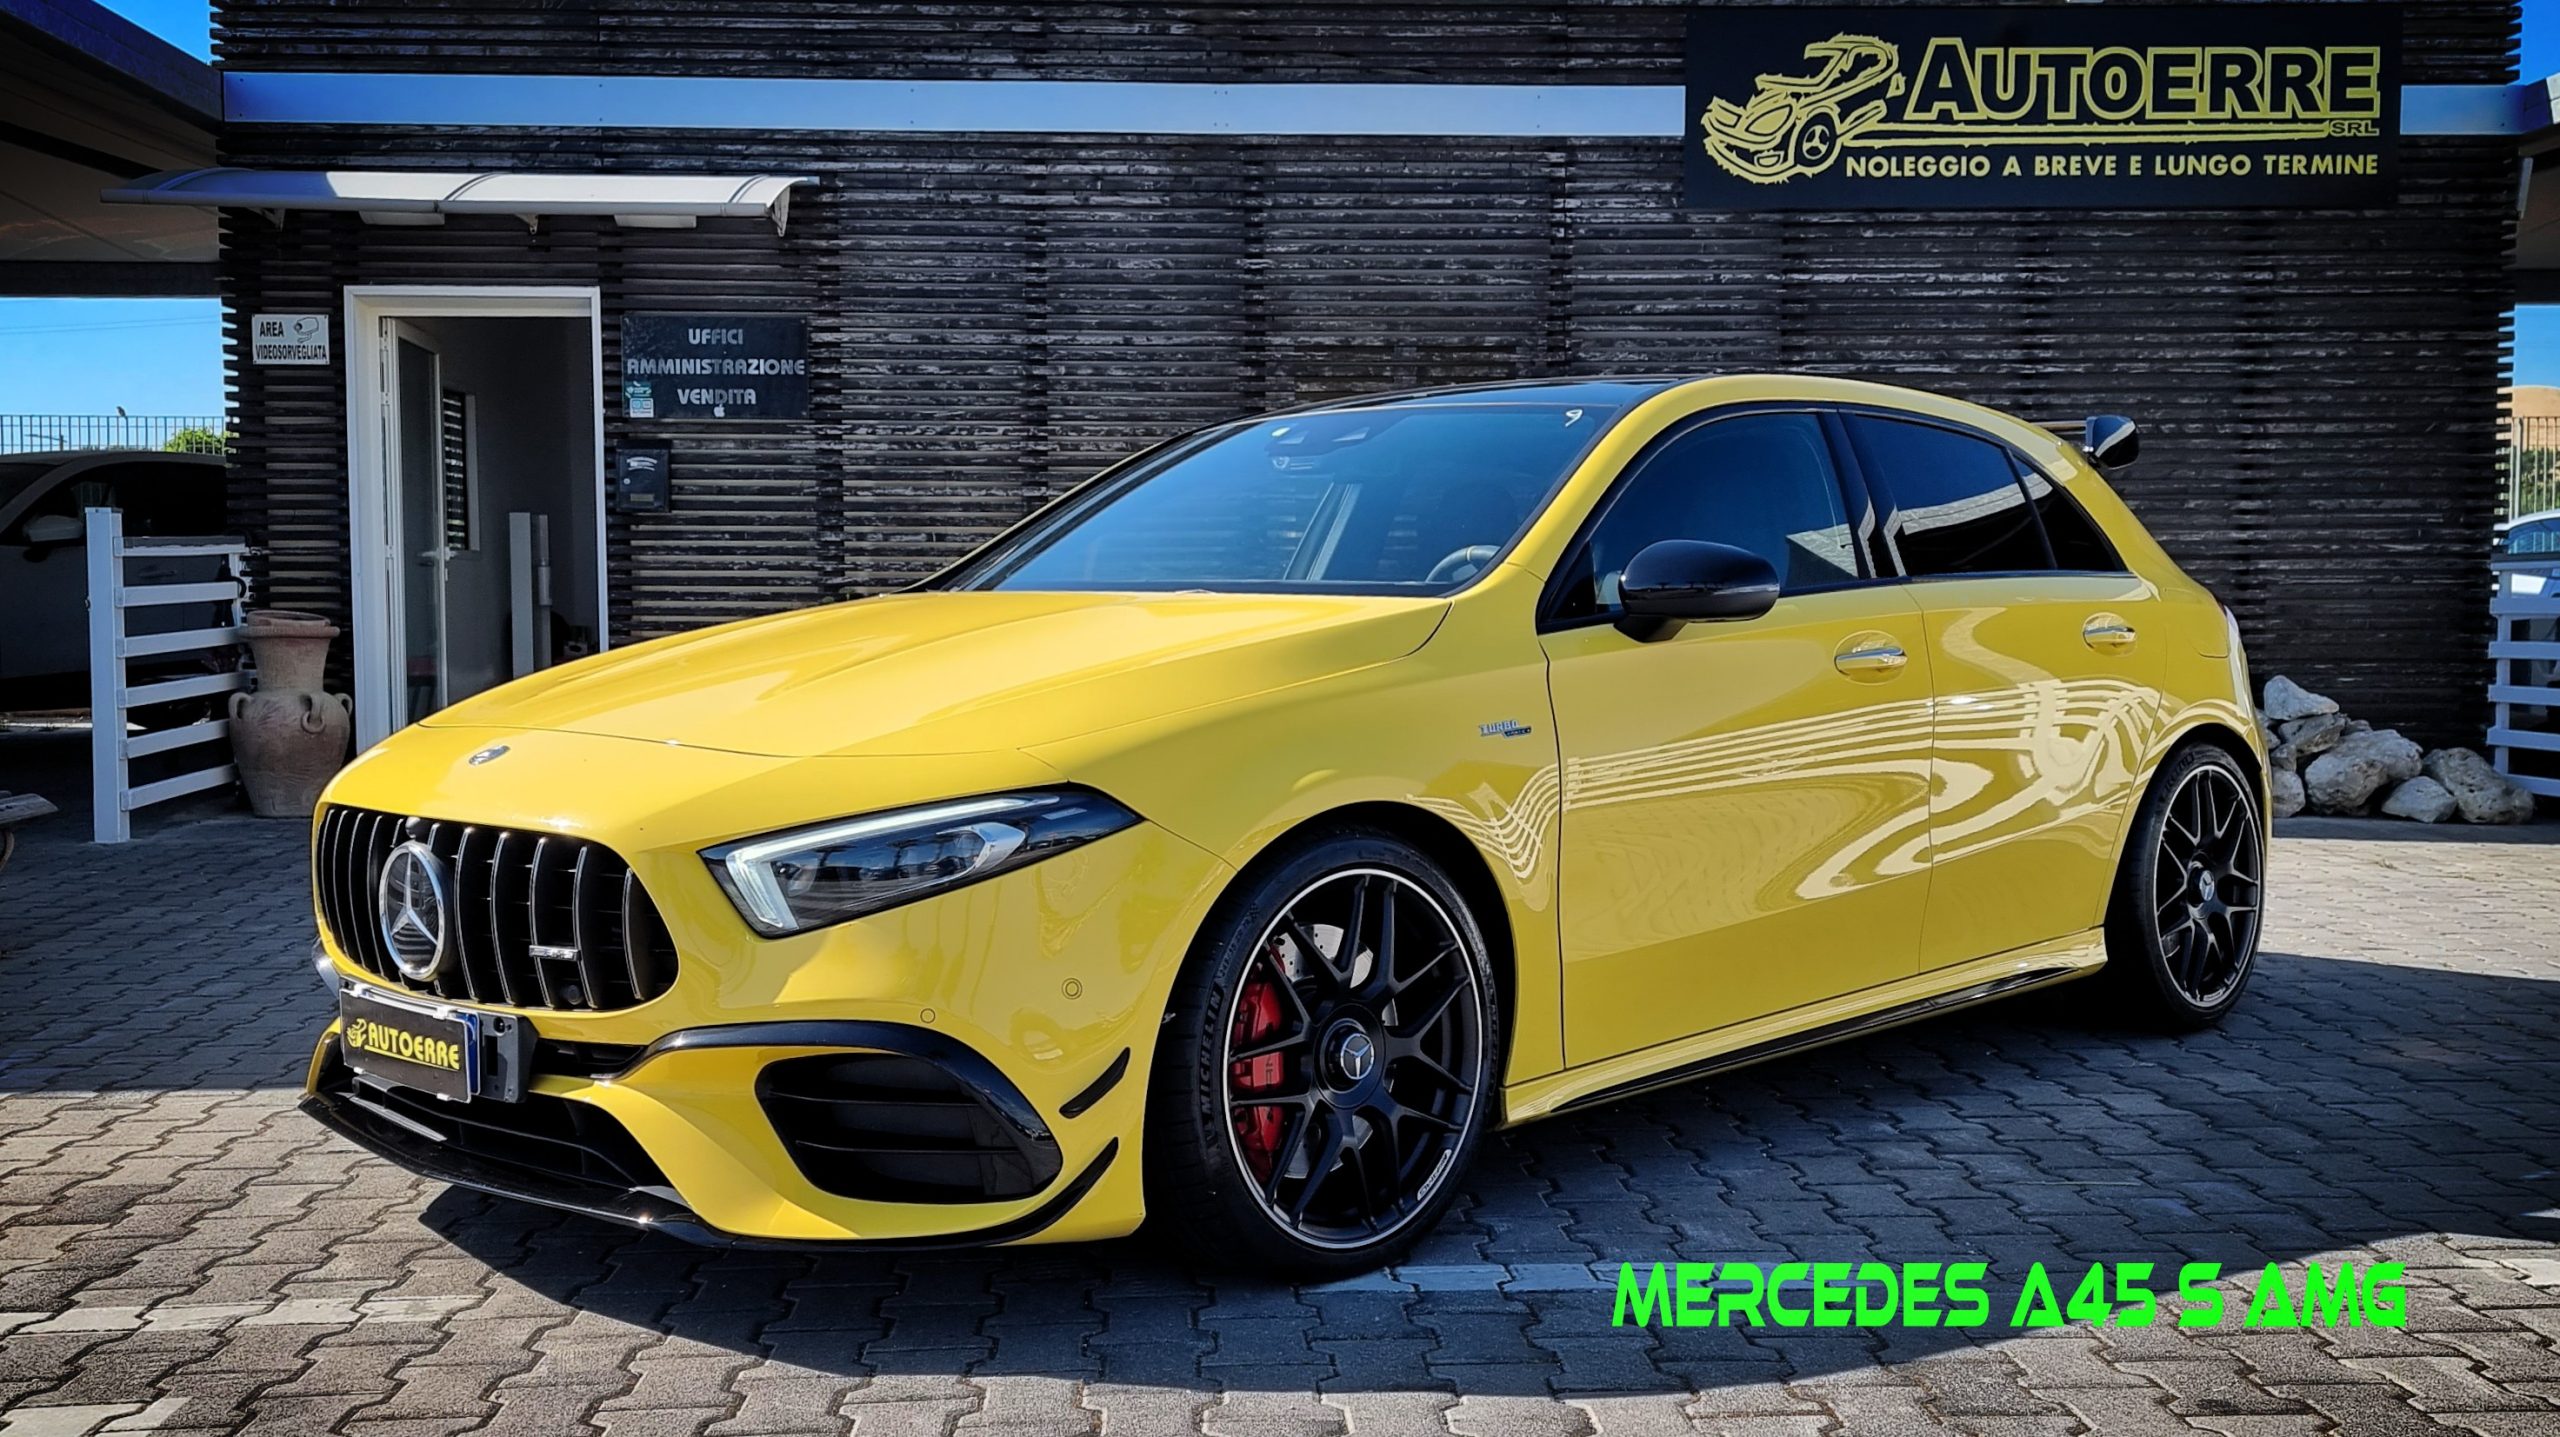 Mercedes-Benz A 45S AMG 4Matic Turbo